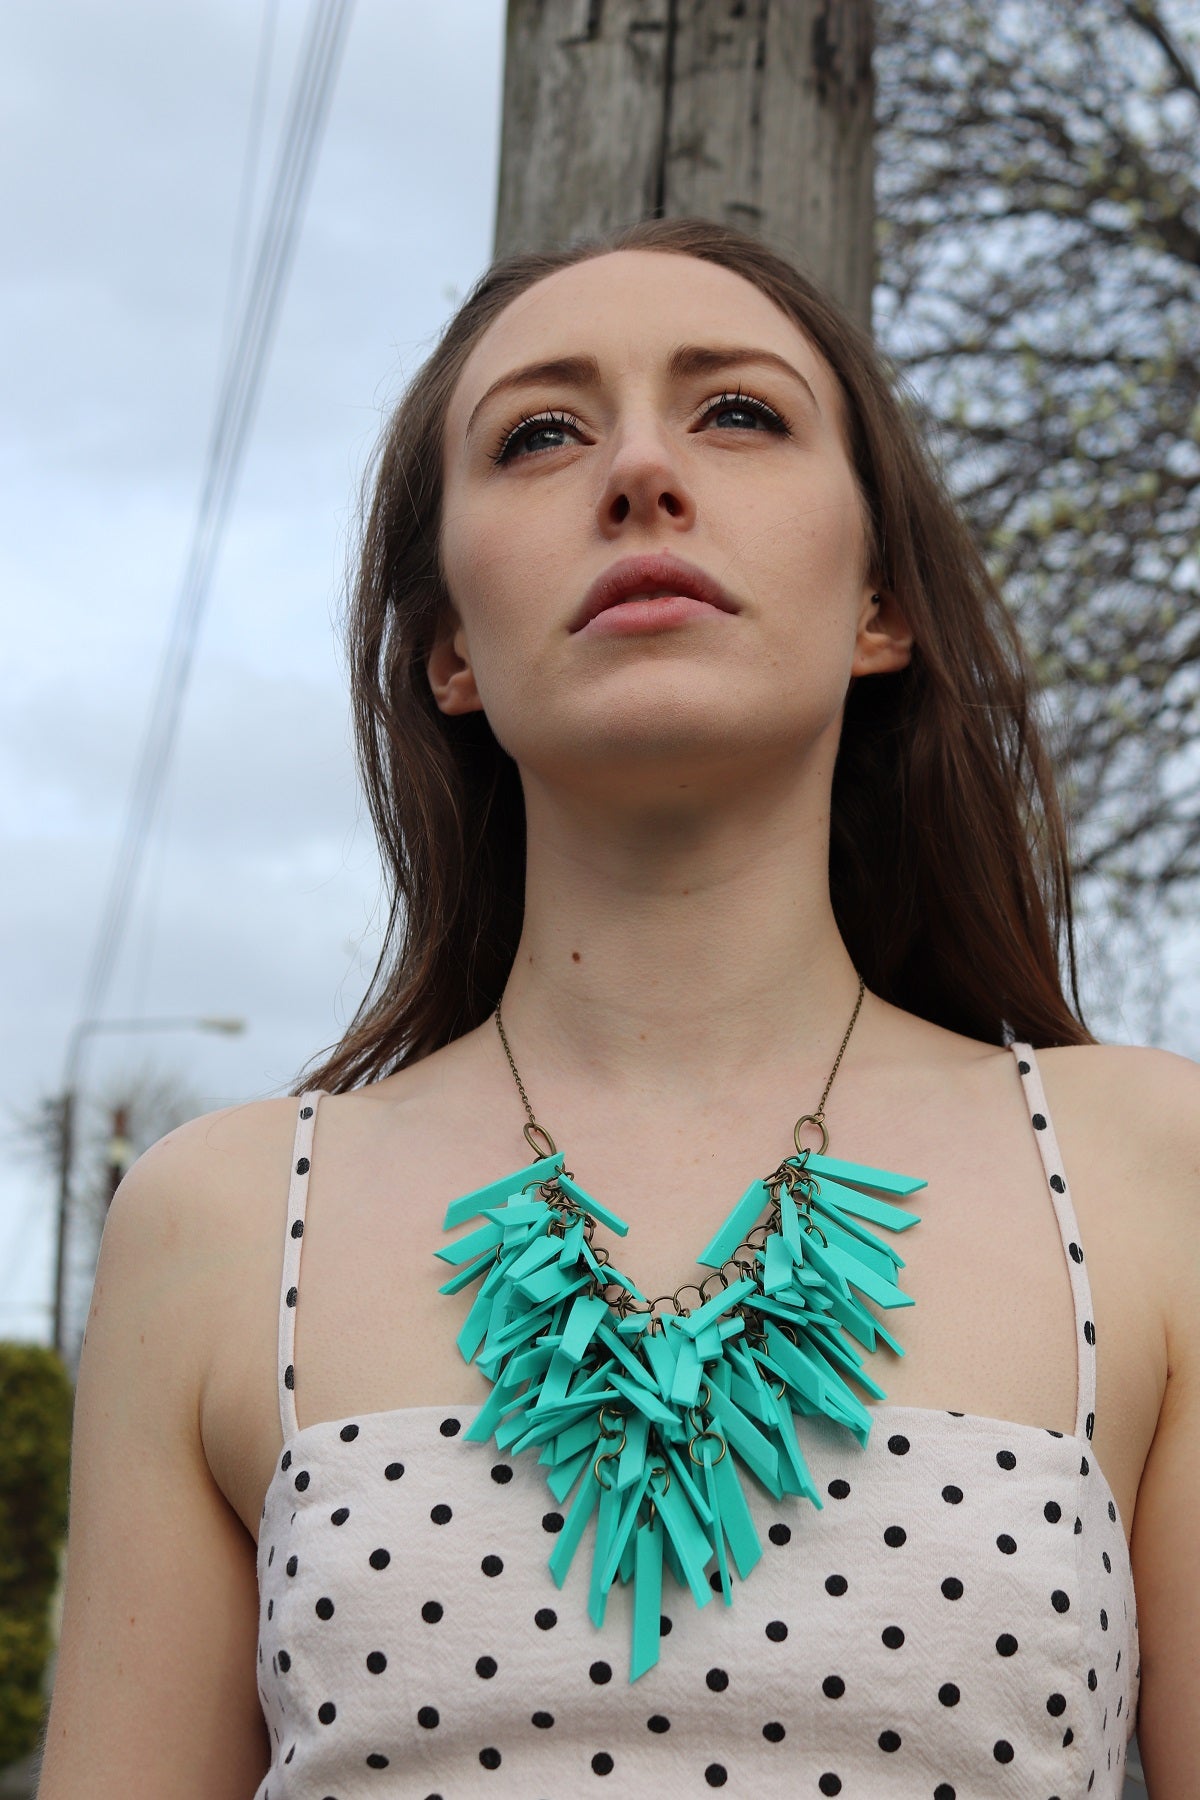 TURQUOISE WATERFALL EXTREMELY LIGHT WEIGHT NECKLACE